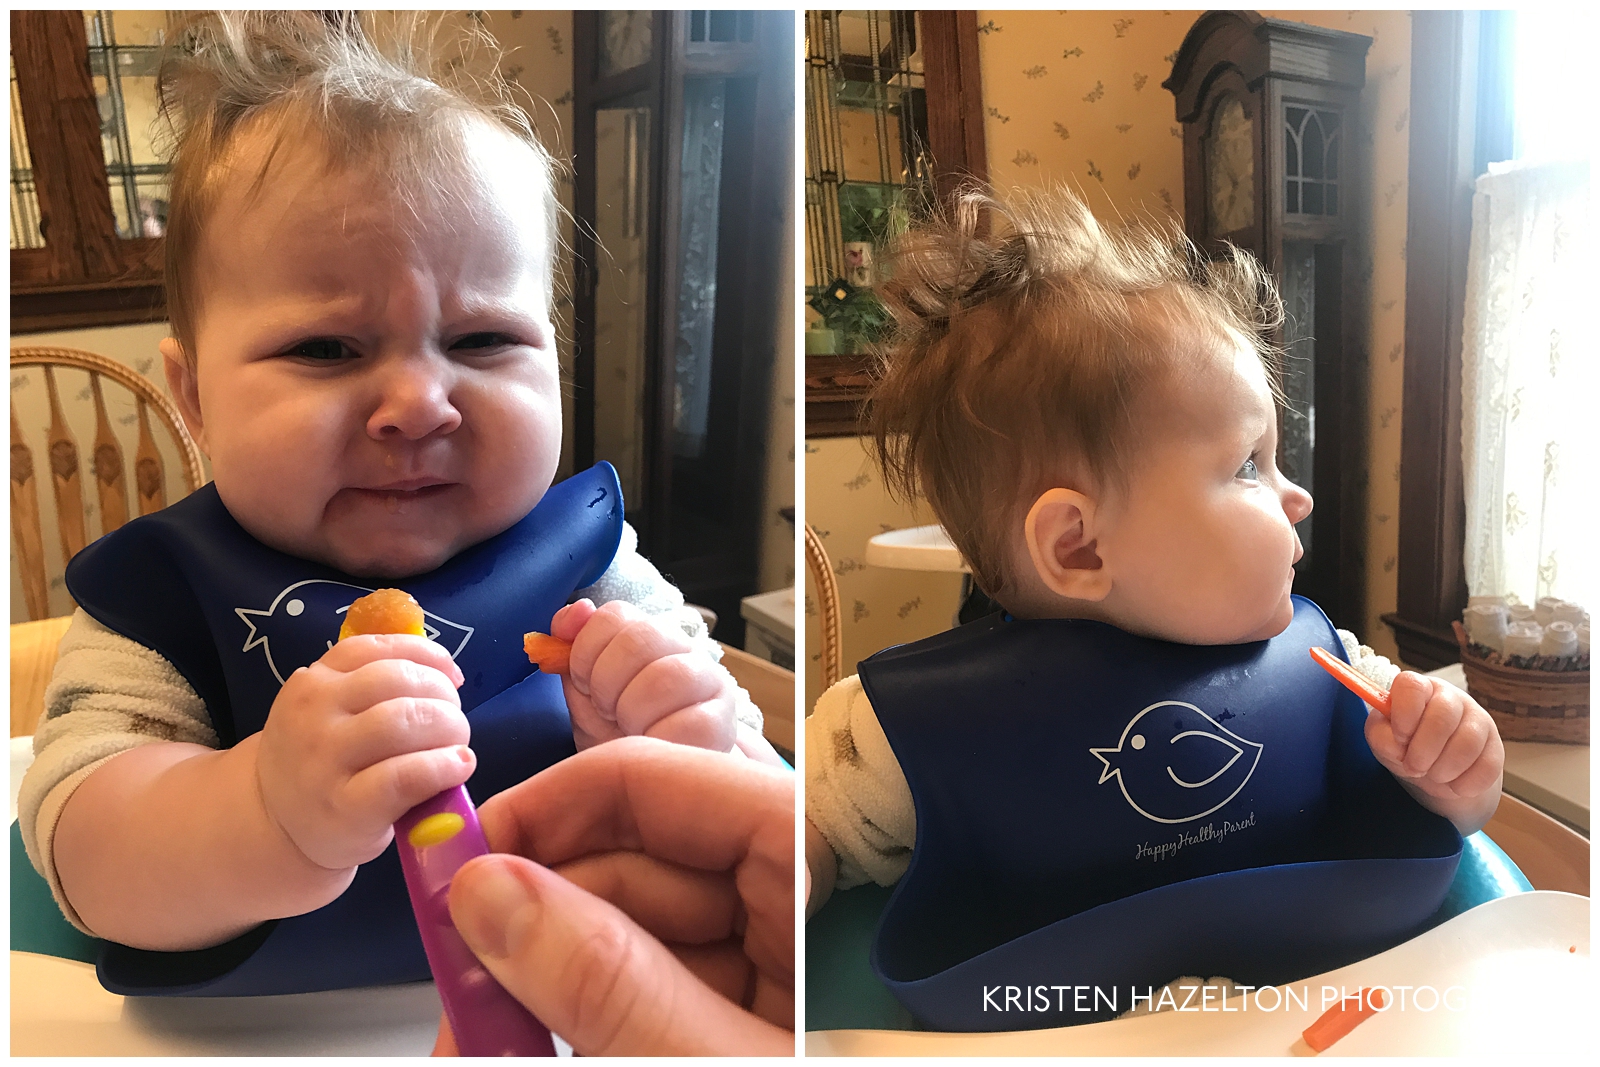 Baby's horrified reaction to first bite of applesauce